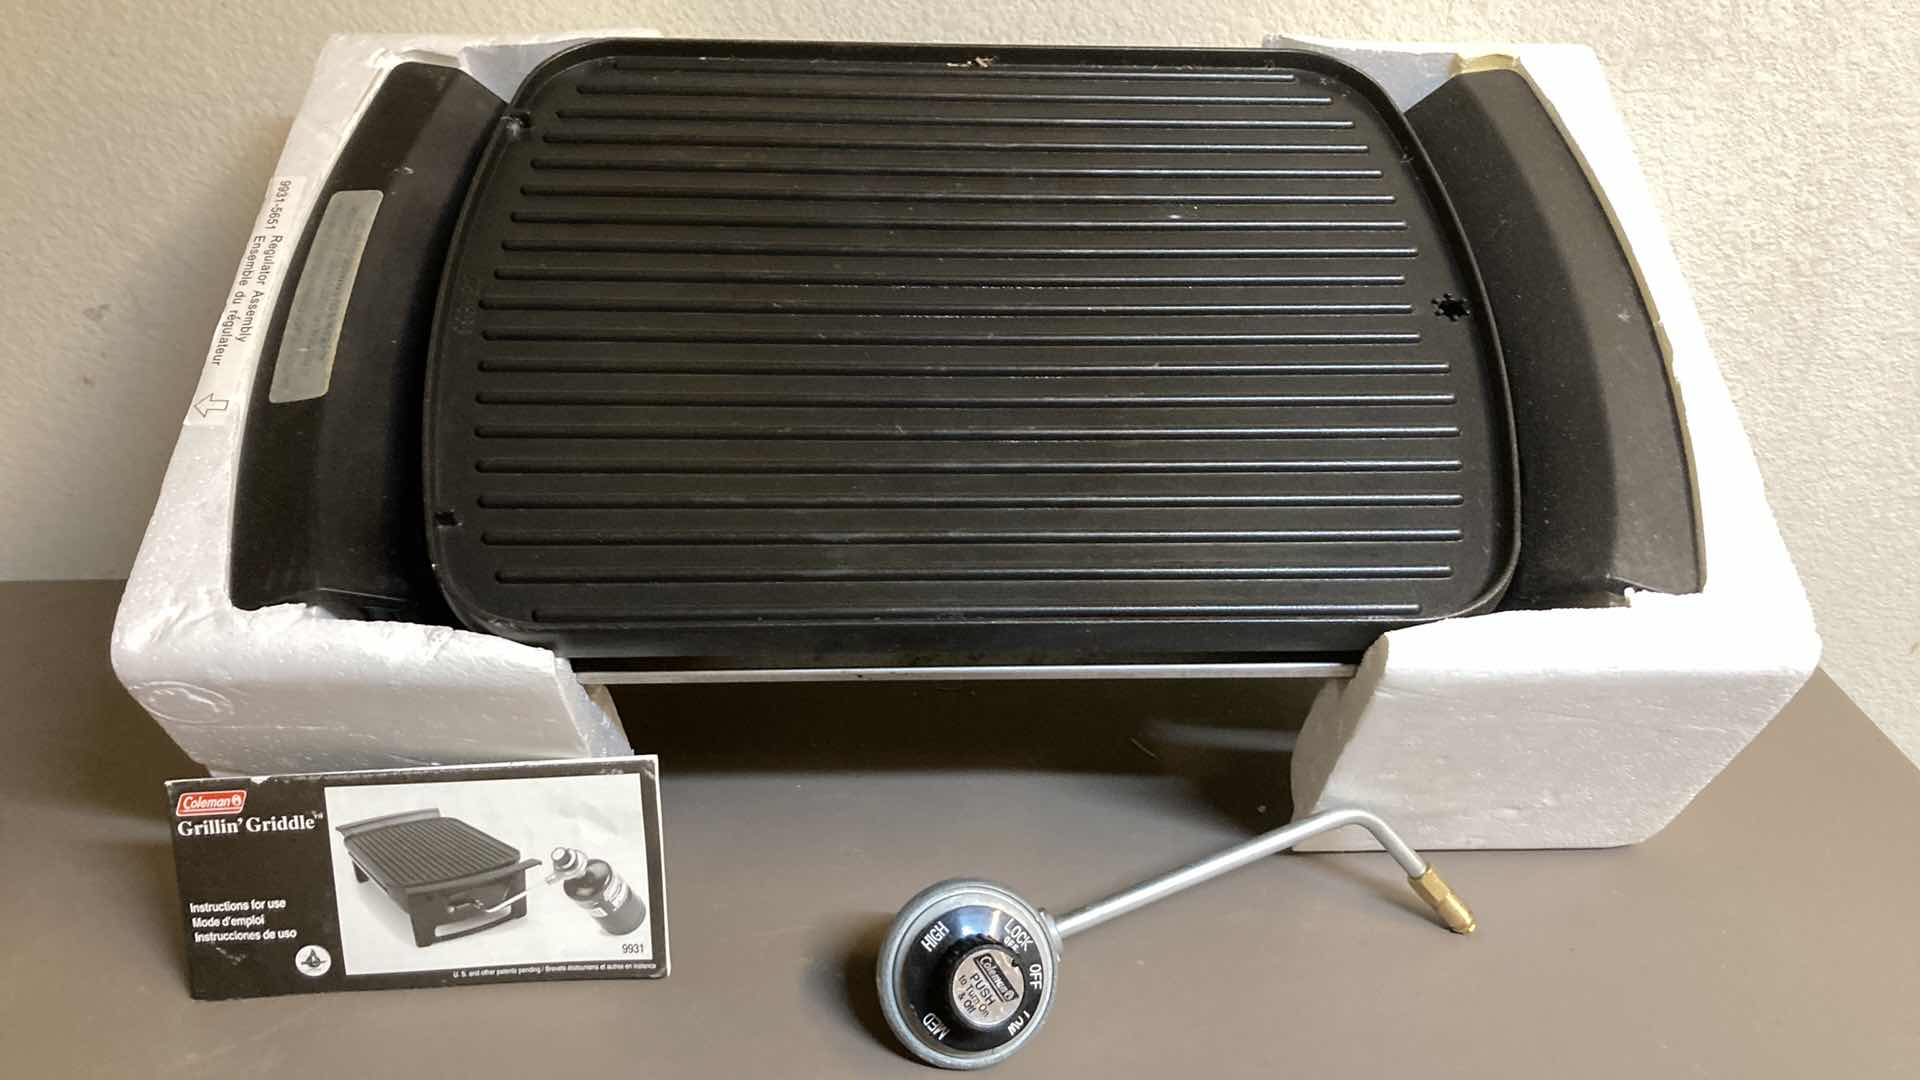 Photo 5 of COLEMAN PROPANE GRILLIN GRIDDLE  MODEL 9931750